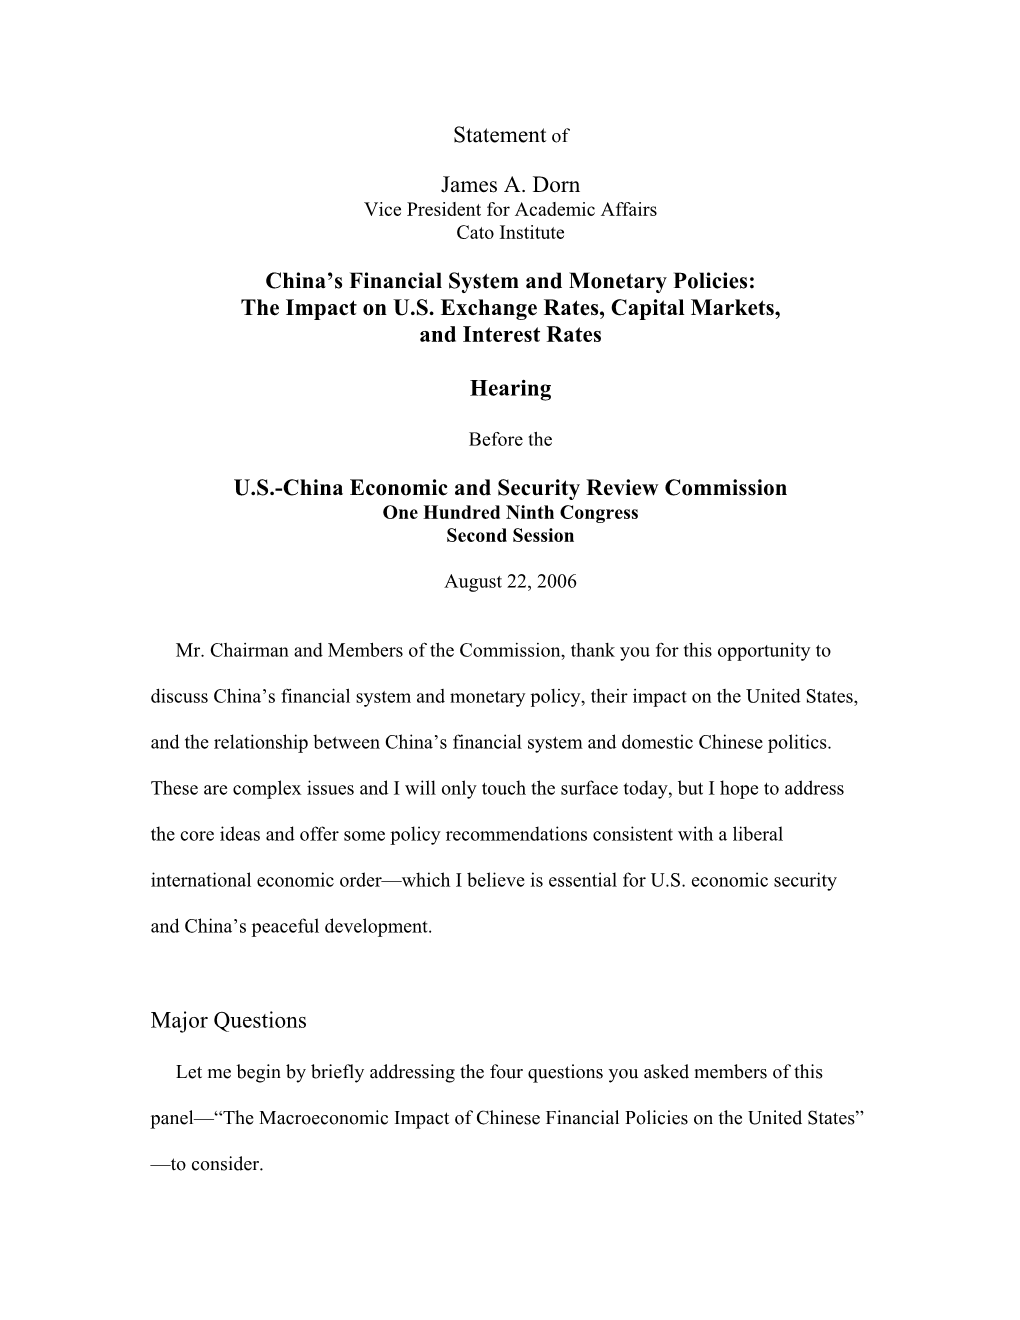 Statement of James A. Dorn China's Financial System and Monetary